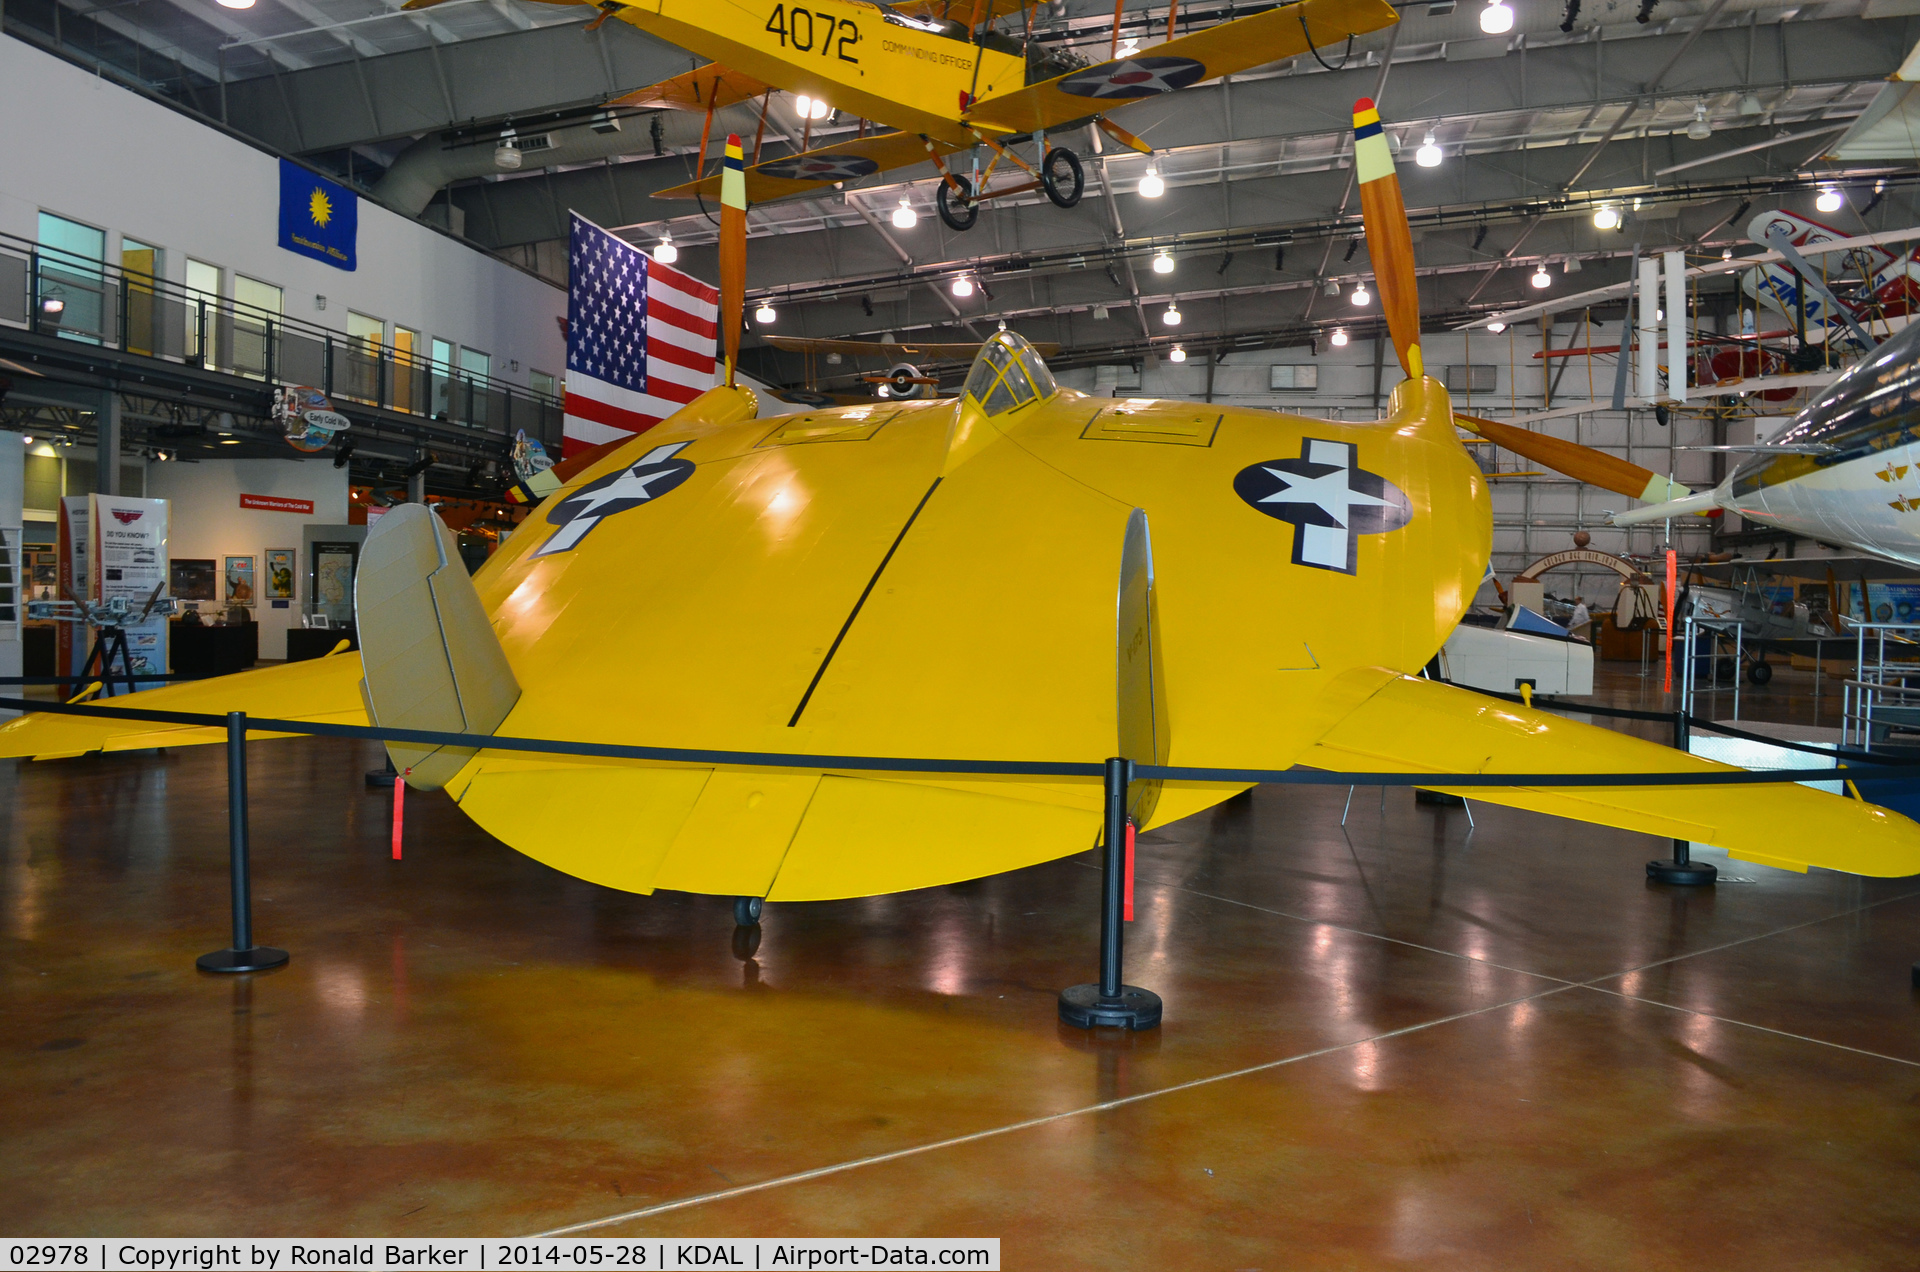 02978, 1942 Vought V-173 C/N 1, Frontiers of Flight Museum DAL